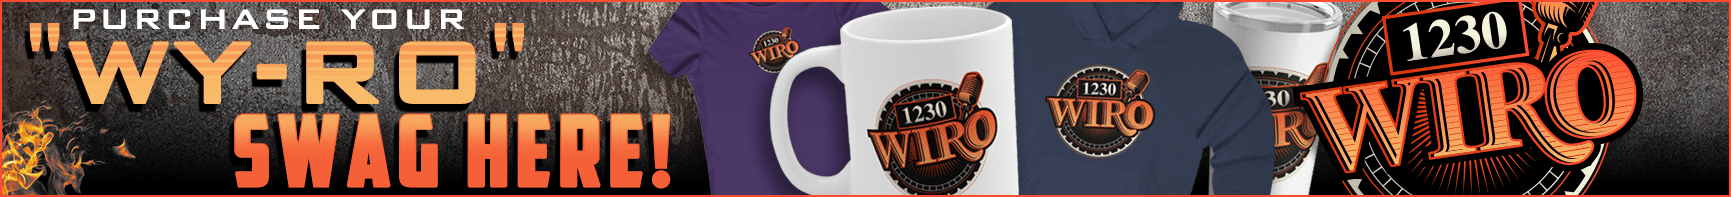 Visit the WIRO Swag Shop!